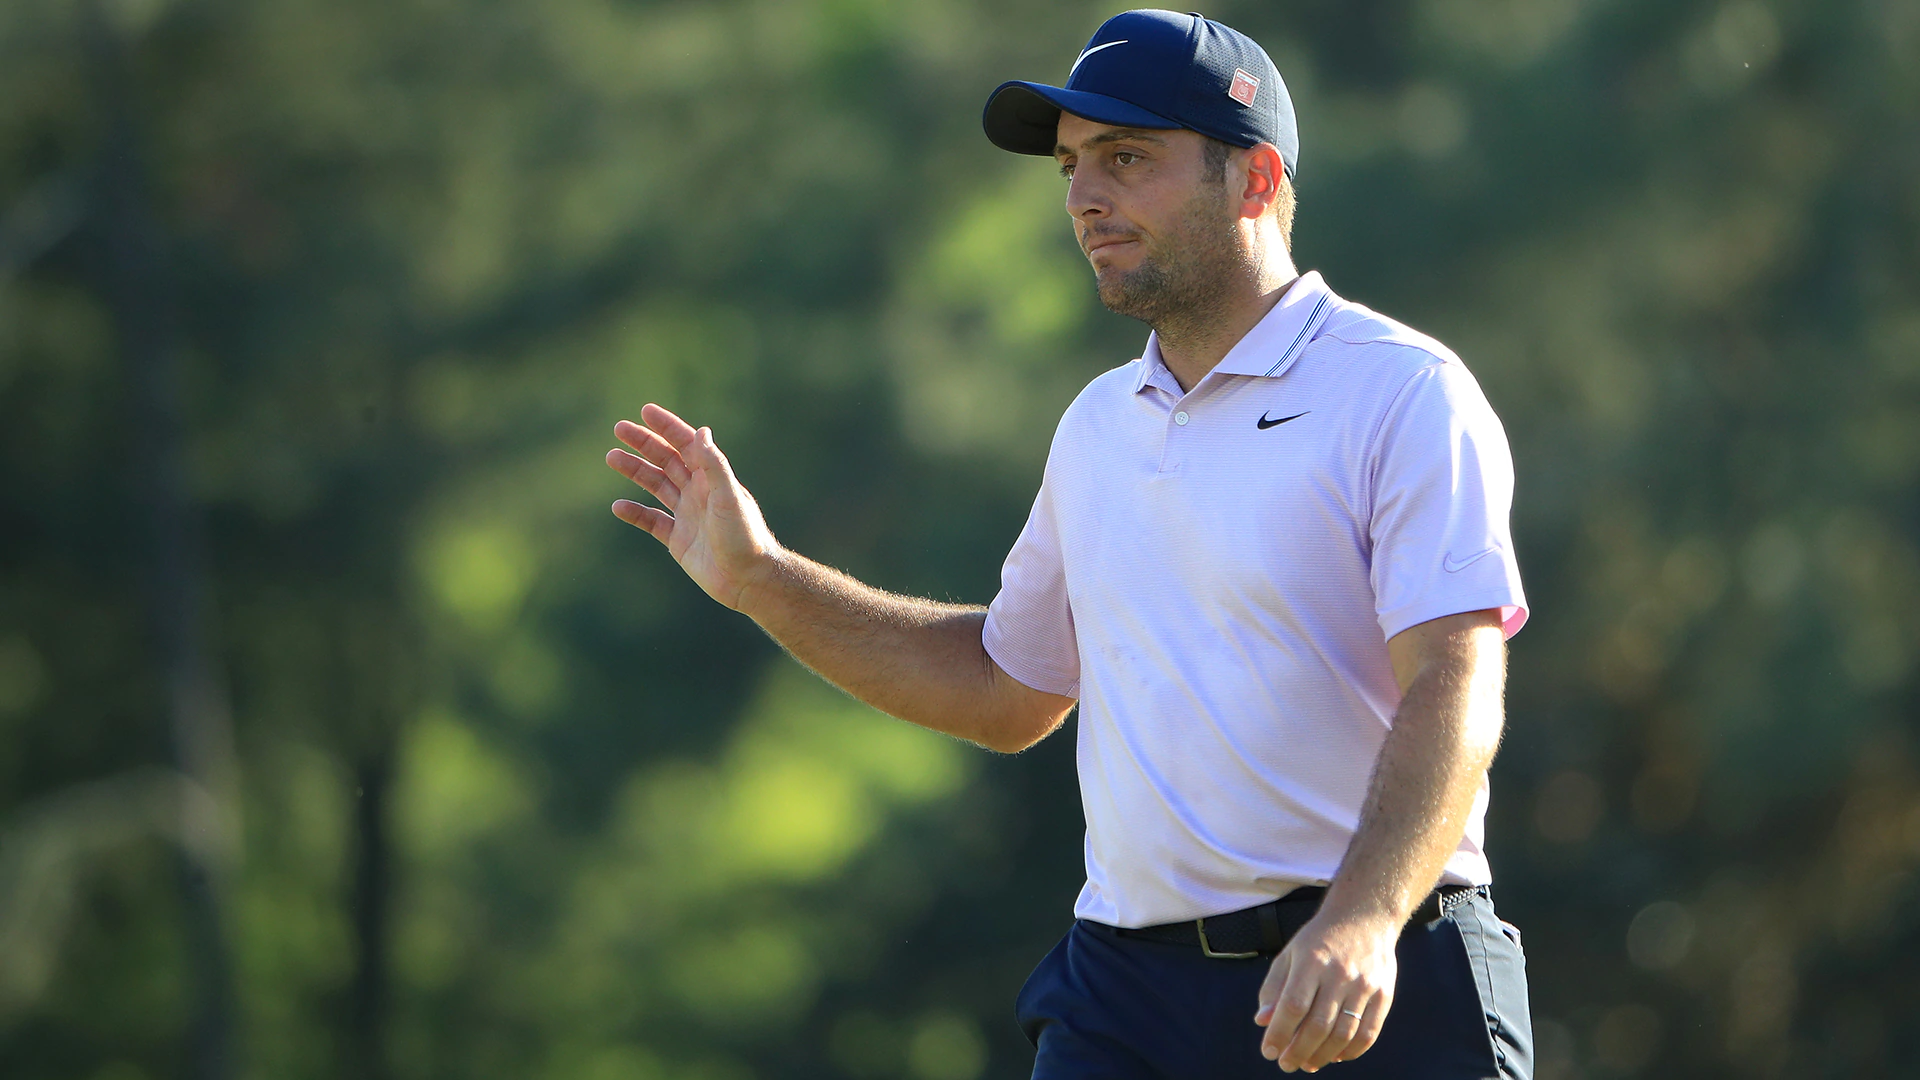 Molinari new betting favorite ahead of final round at Augusta National